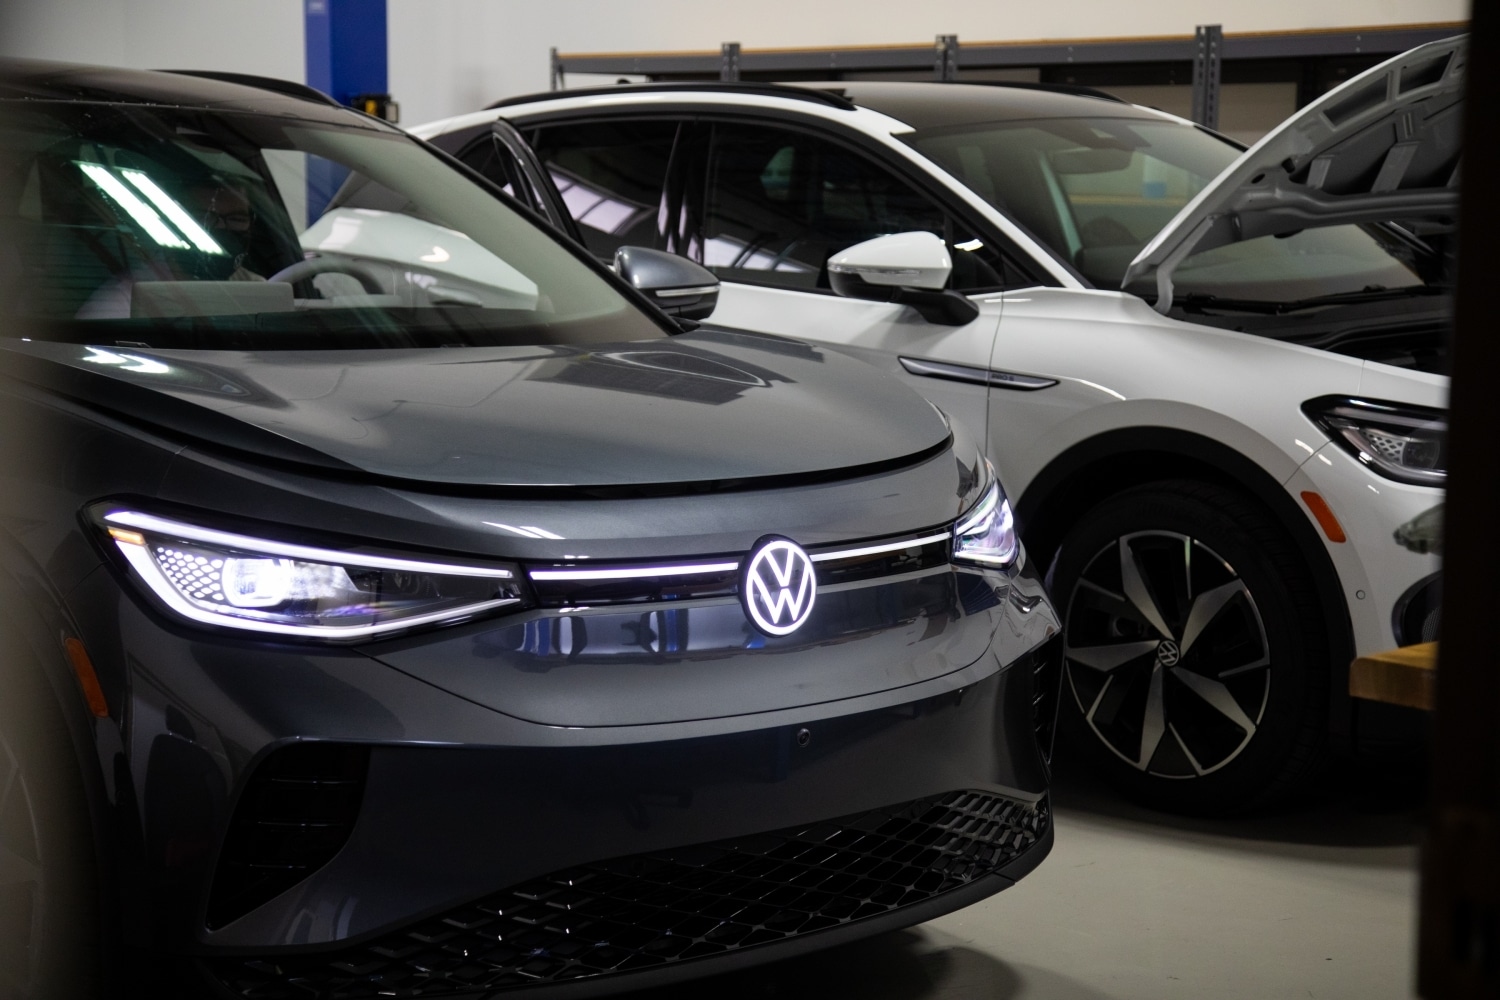 The road to Volkswagen success in Americans starts in Chattanooga